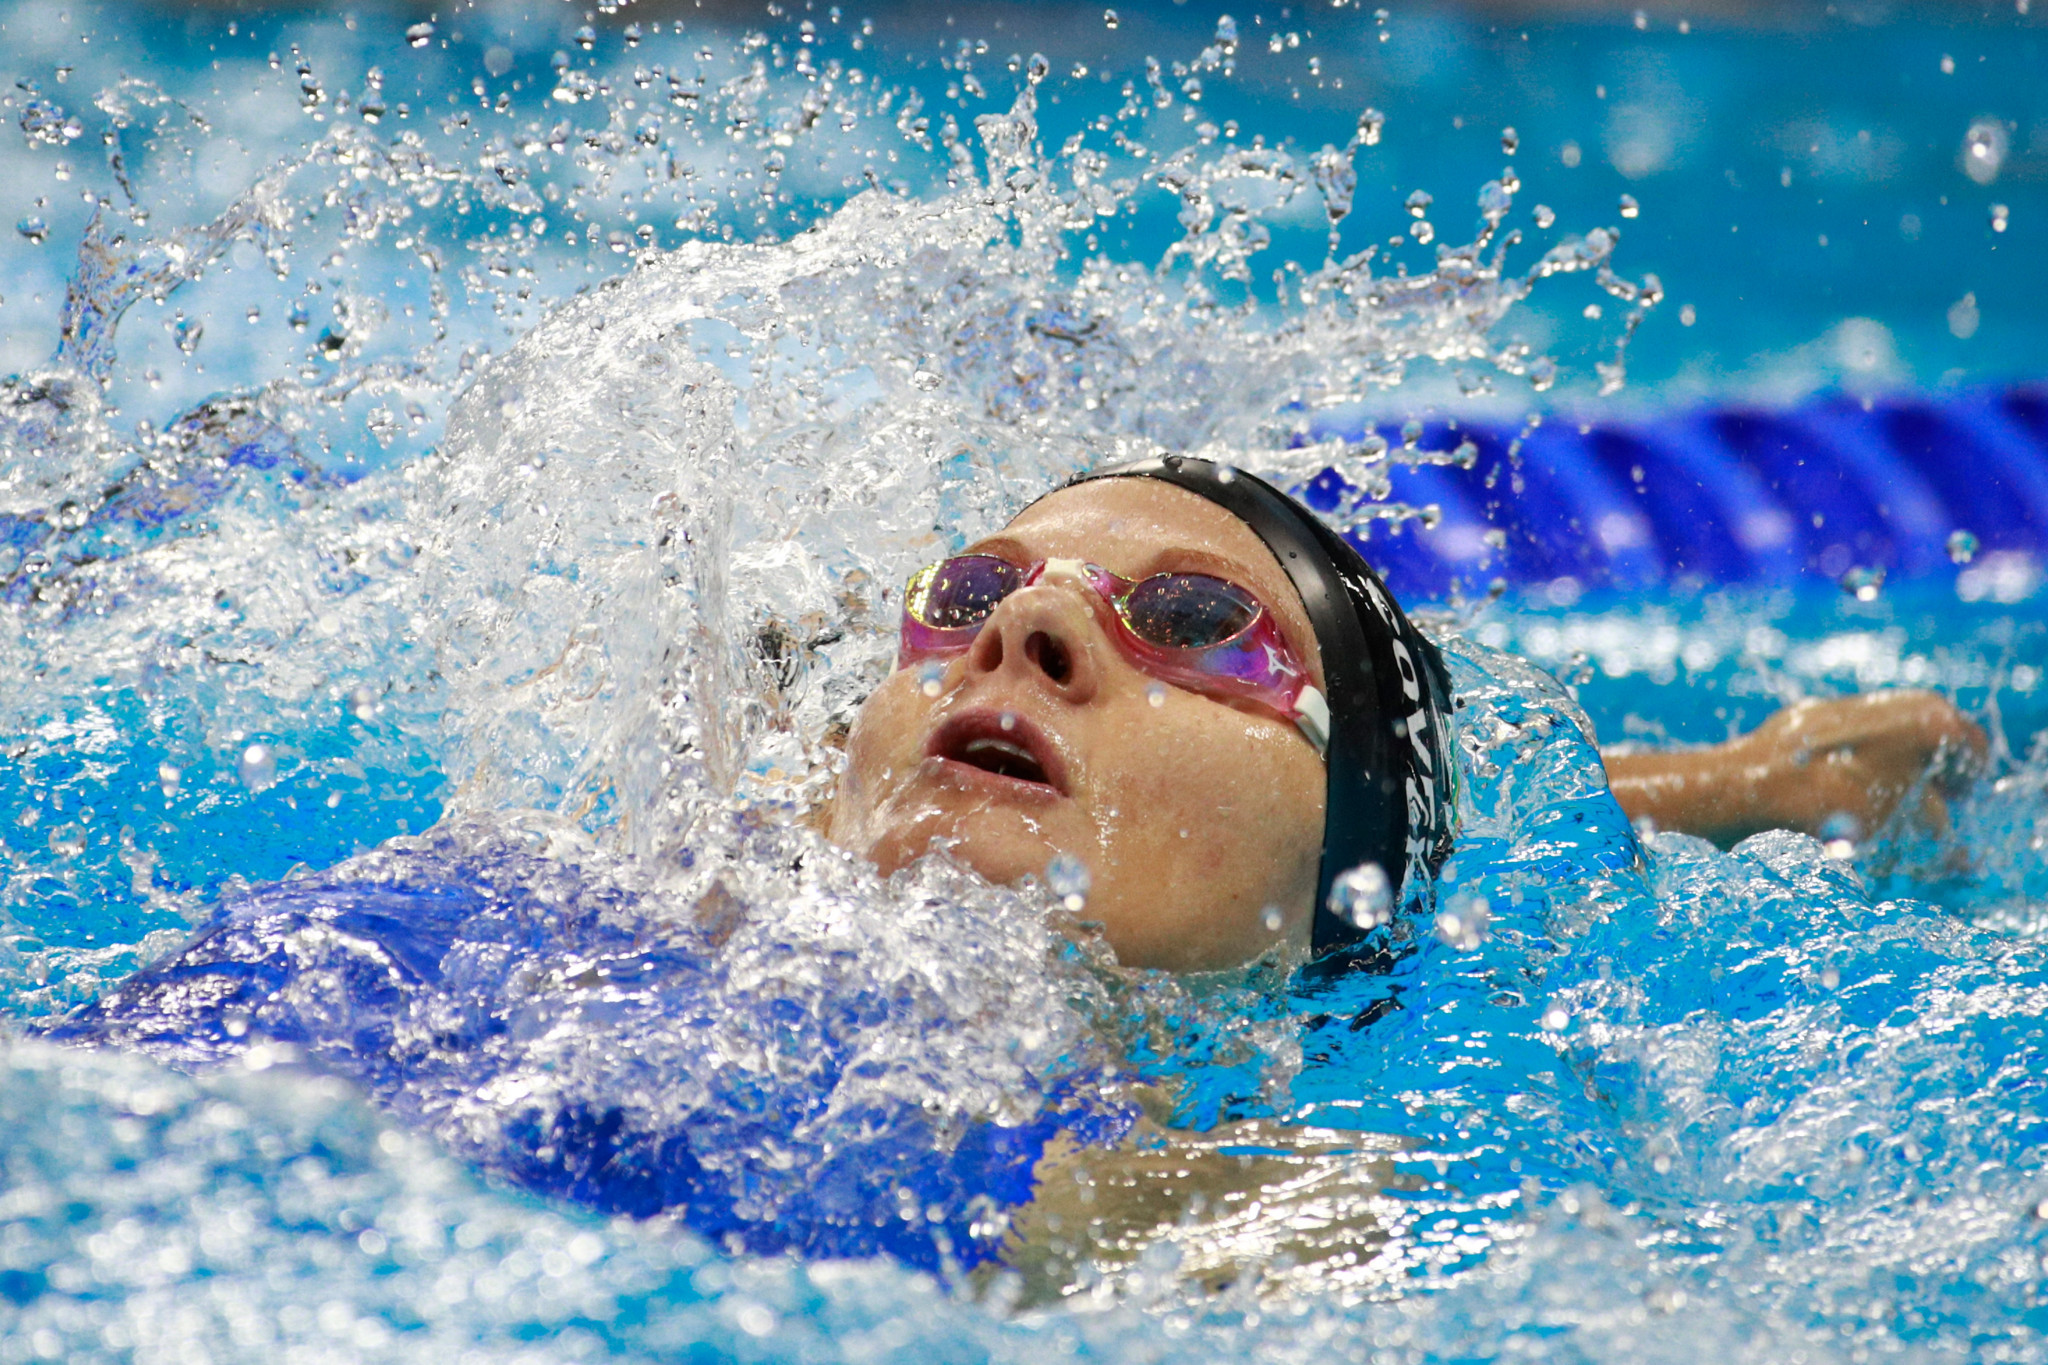 Kirsty Coventry claims Olympic Solidarity funding helped her own swimming career ©Getty Images